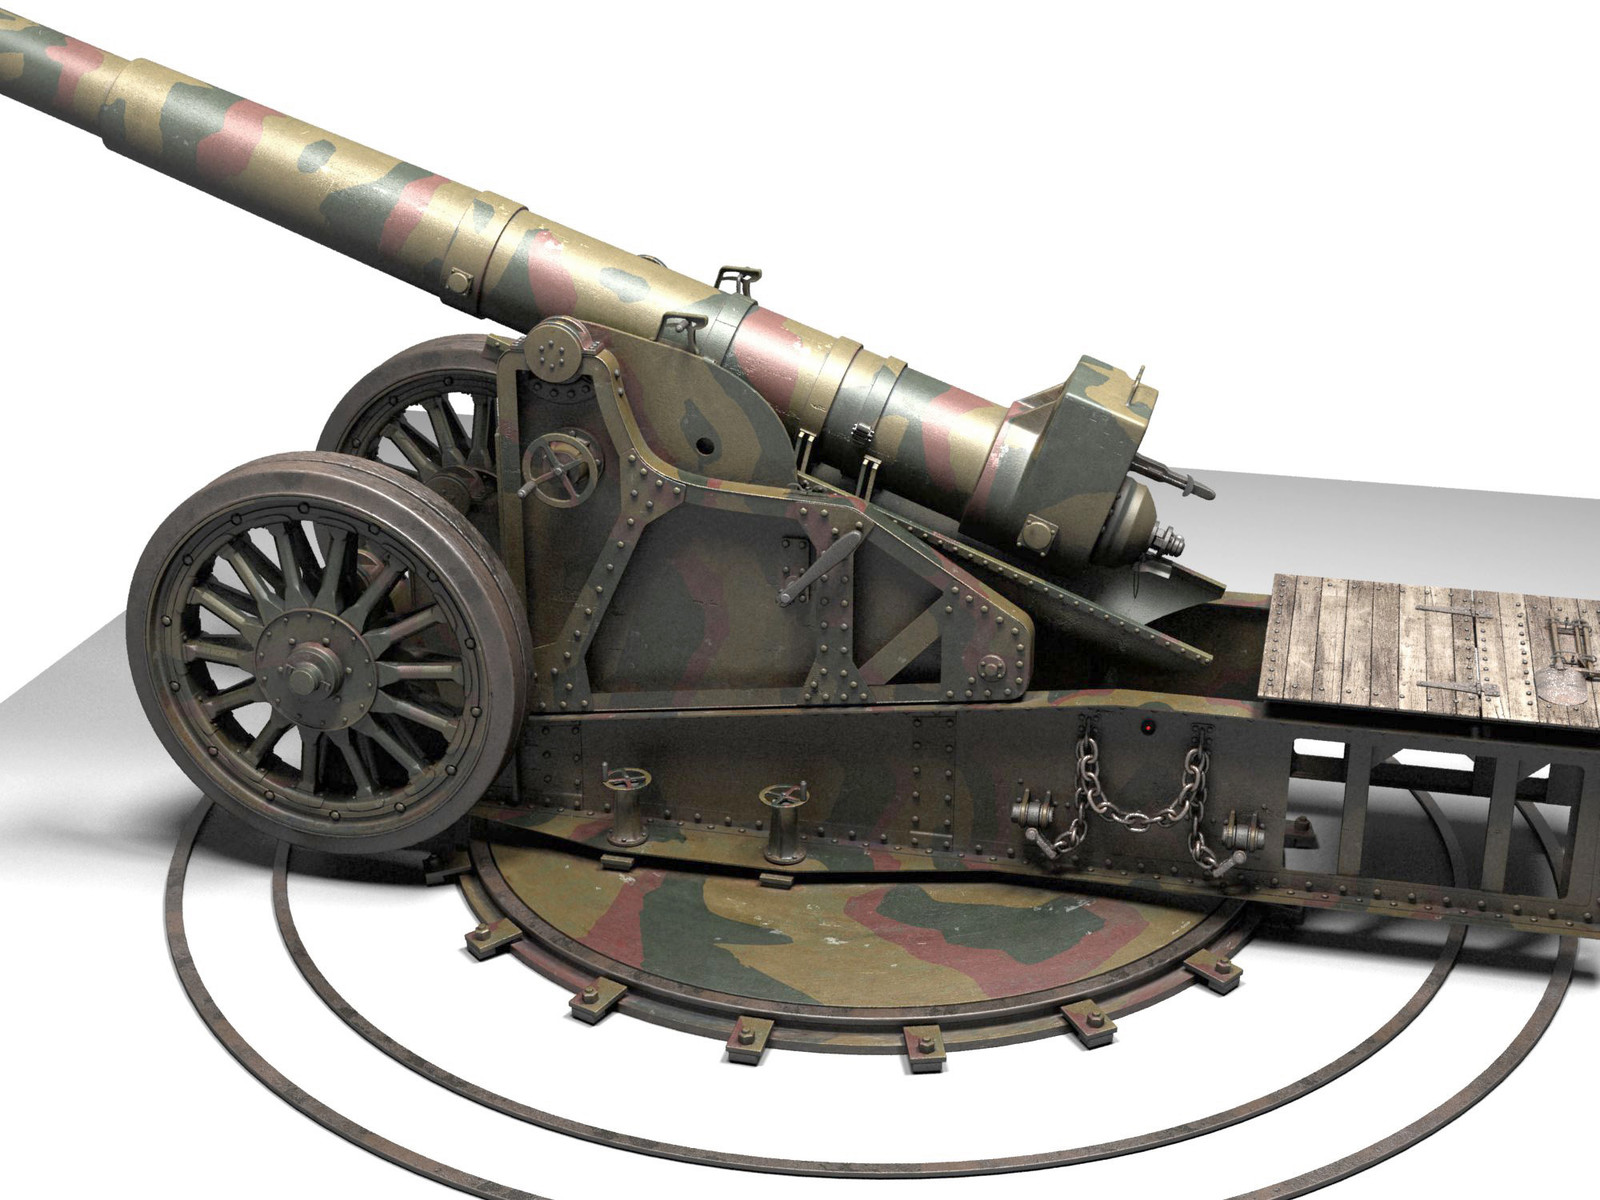 I researched camouflage patterns used on the guns in the Channel Islands in WW2, then created textures and bump maps to add to the realism when rendered. 